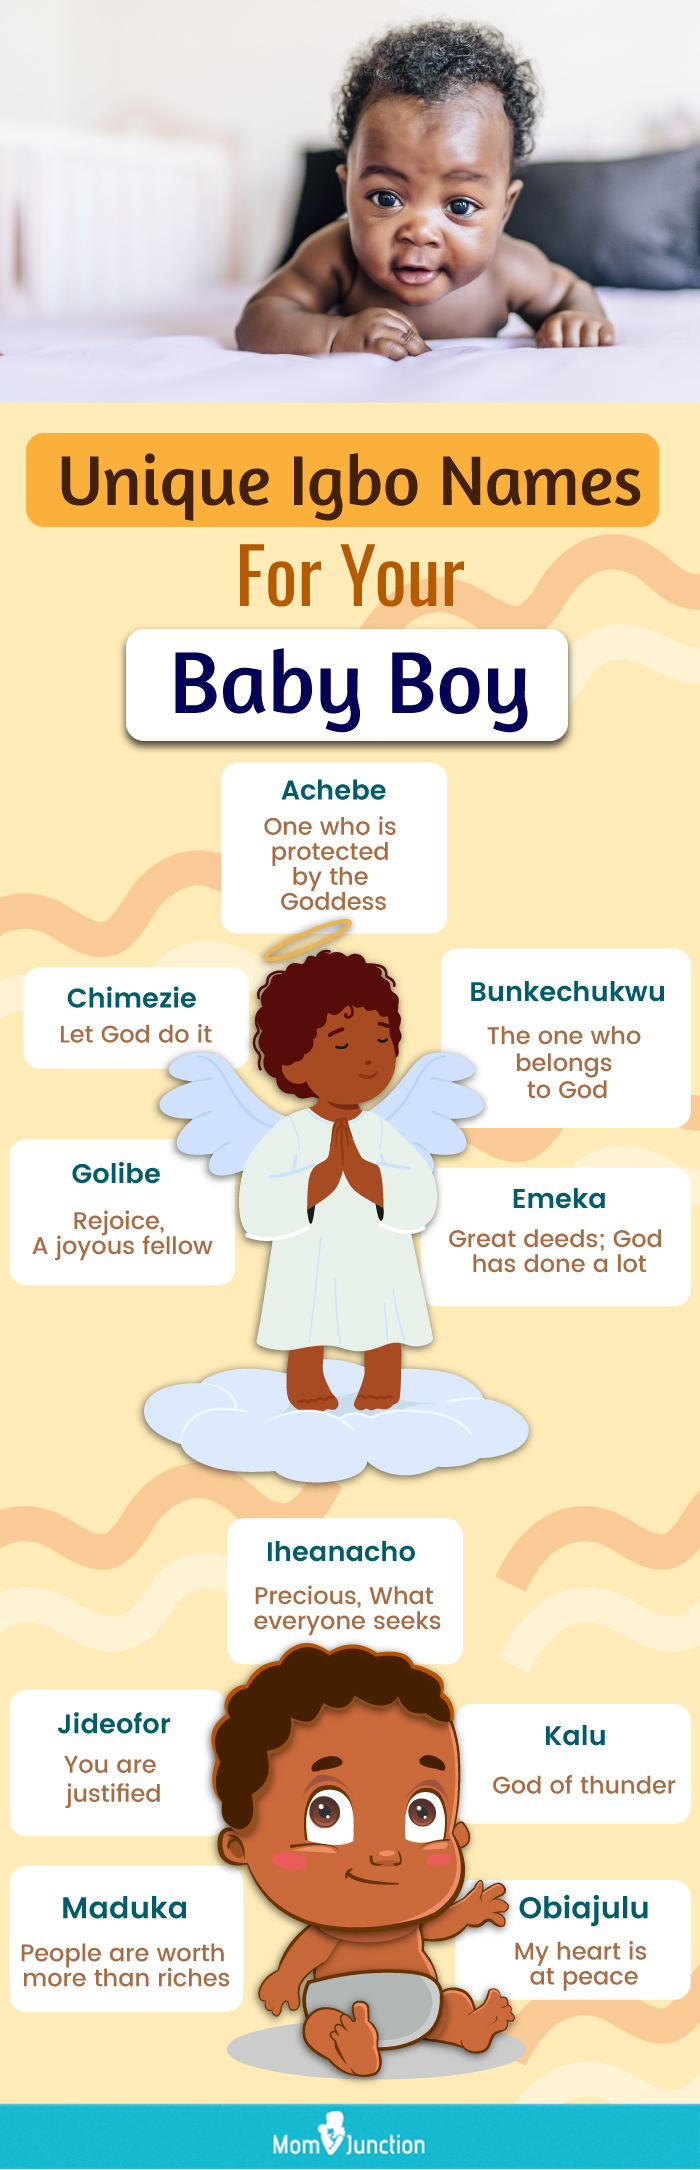 unique igbo names for your baby boy (infographic)